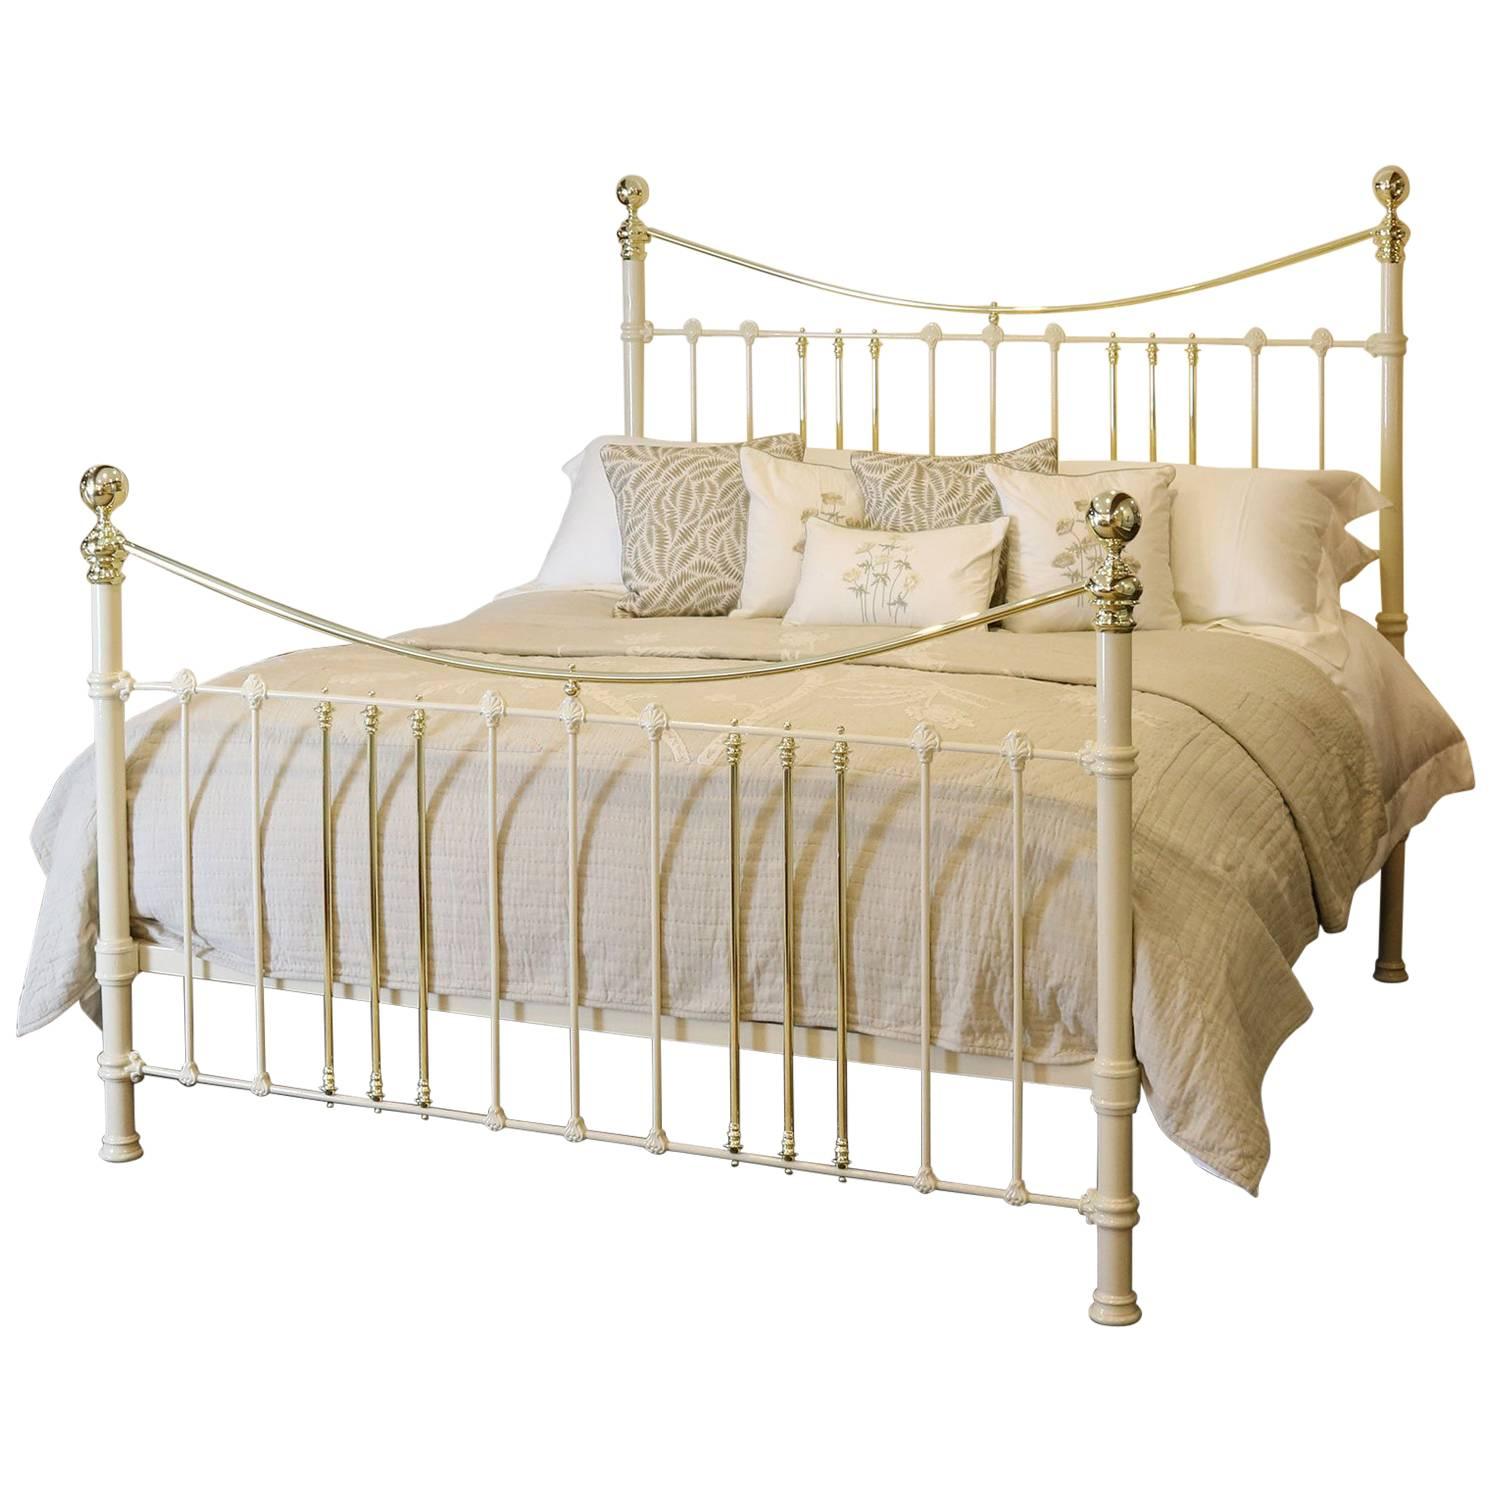 Wide Brass and Iron Bed in Cream MSK39